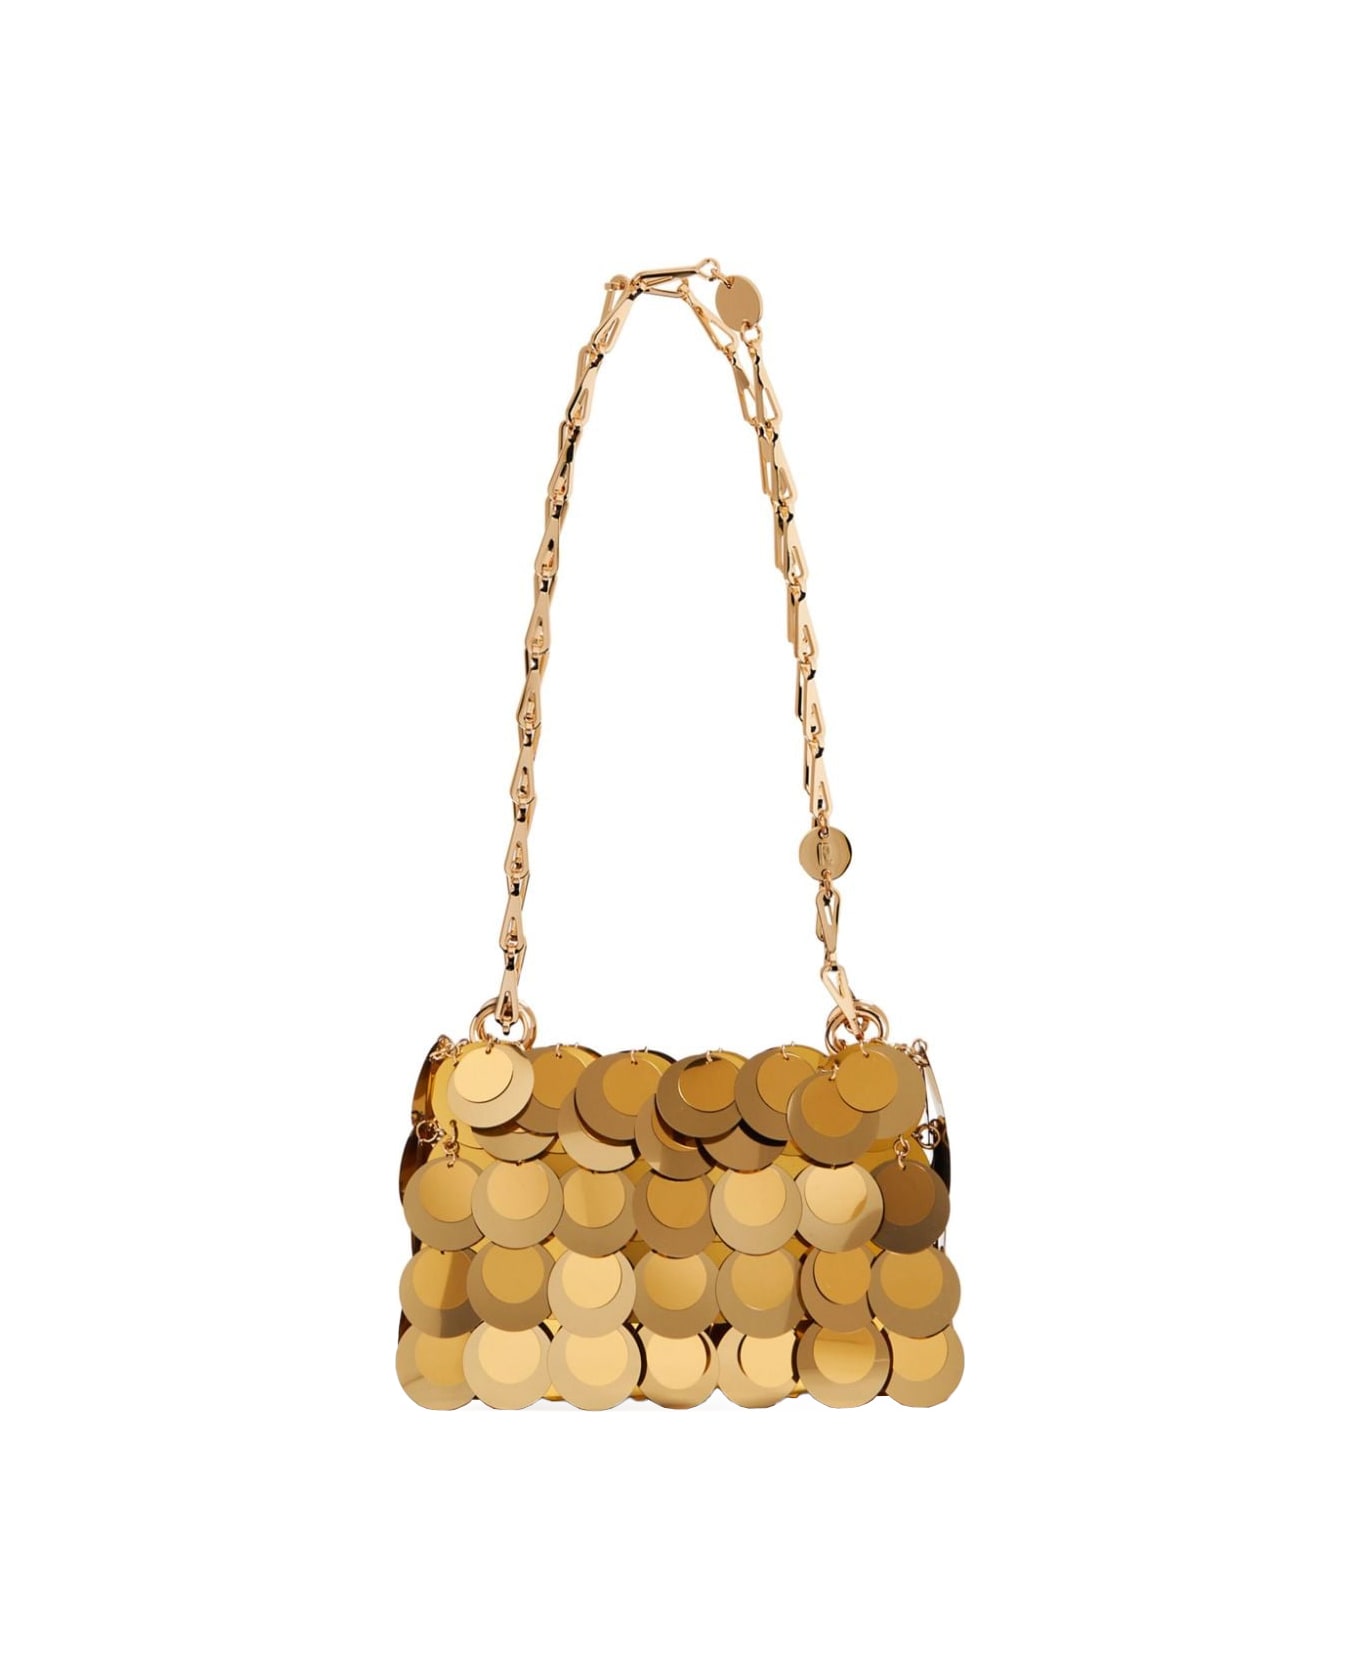 Paco Rabanne Iconic 1969 Sparkle Discs Nano Bag In Gold - Gold